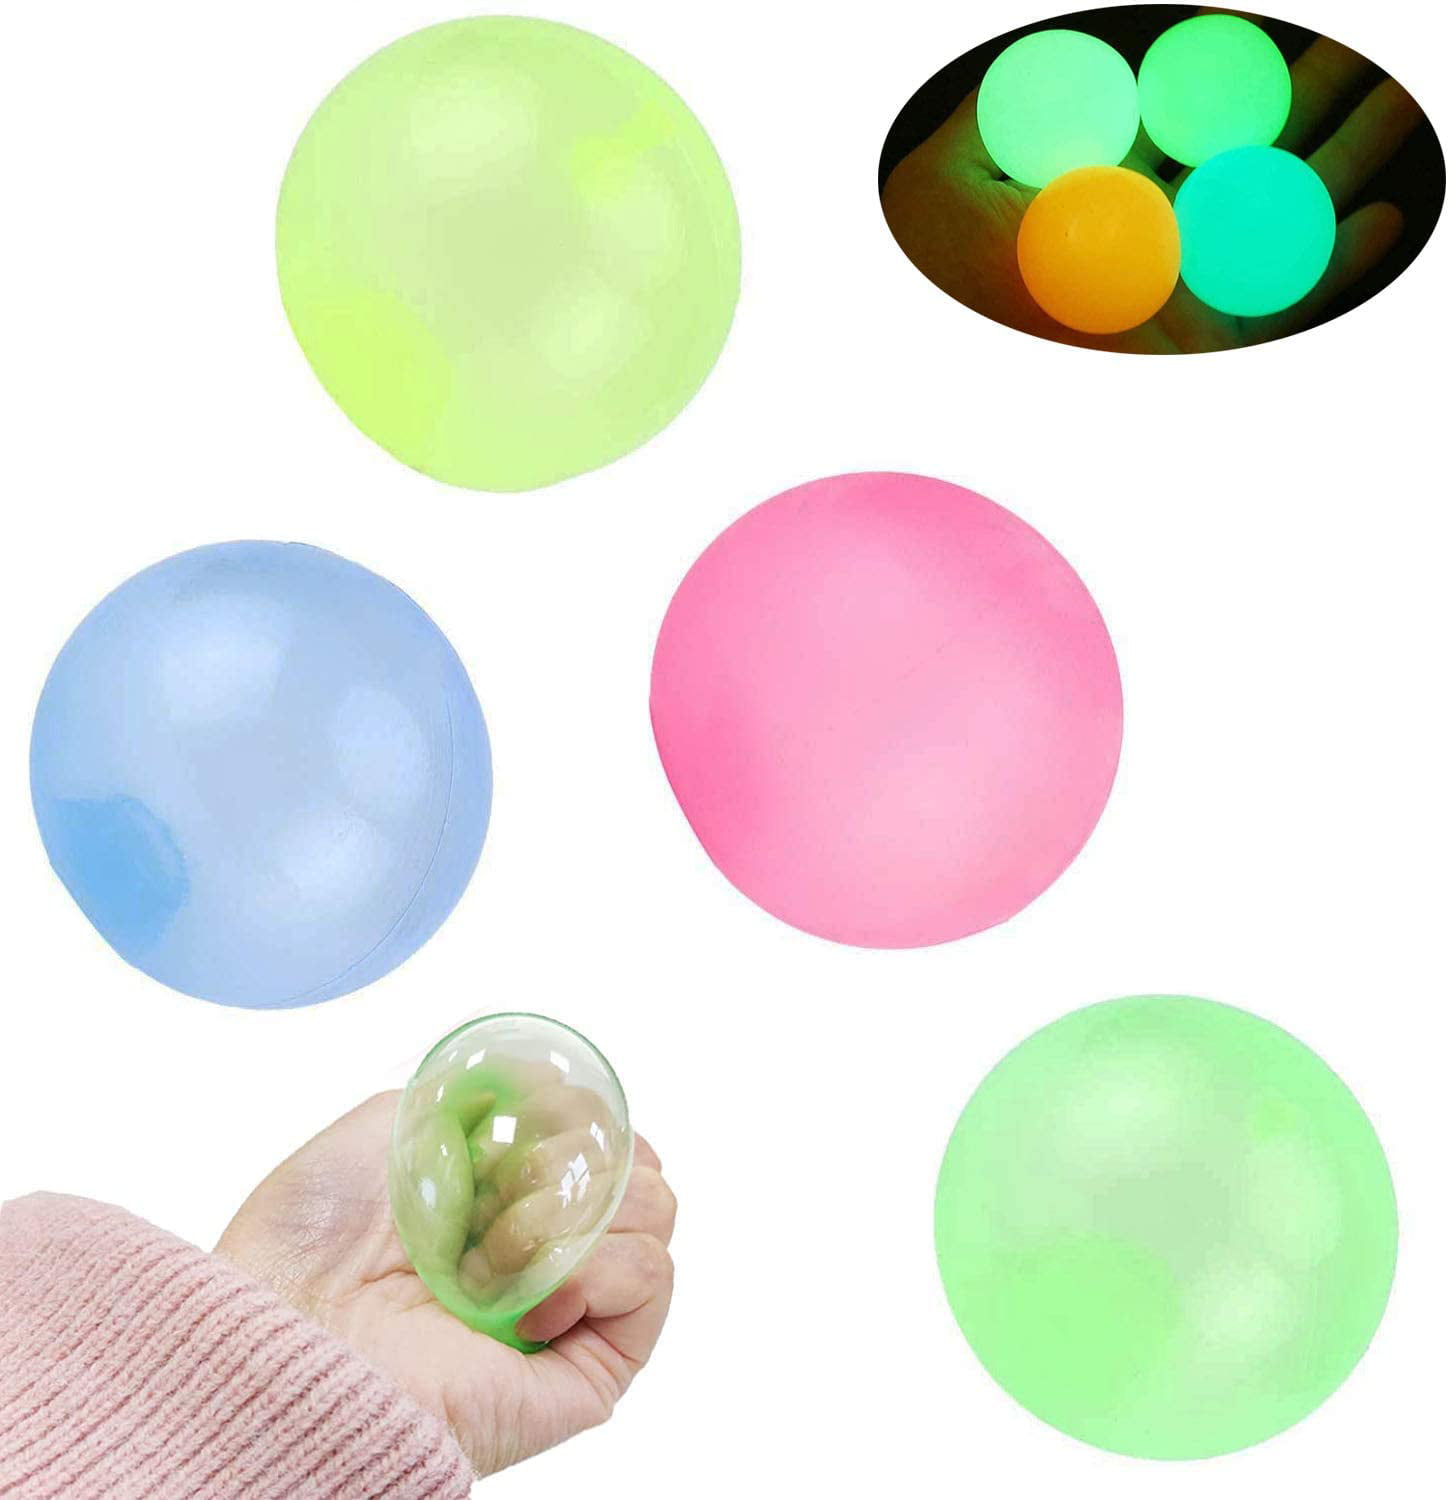 Luminescent Stress Relief Balls Sticky Ball Fluorescent Sticky Wall Balls Decompression Toys Balls Kids and Adults Tear-Resistant Ceiling Sticky Target Balls Fun Toys Kids and Adults- 45mm 